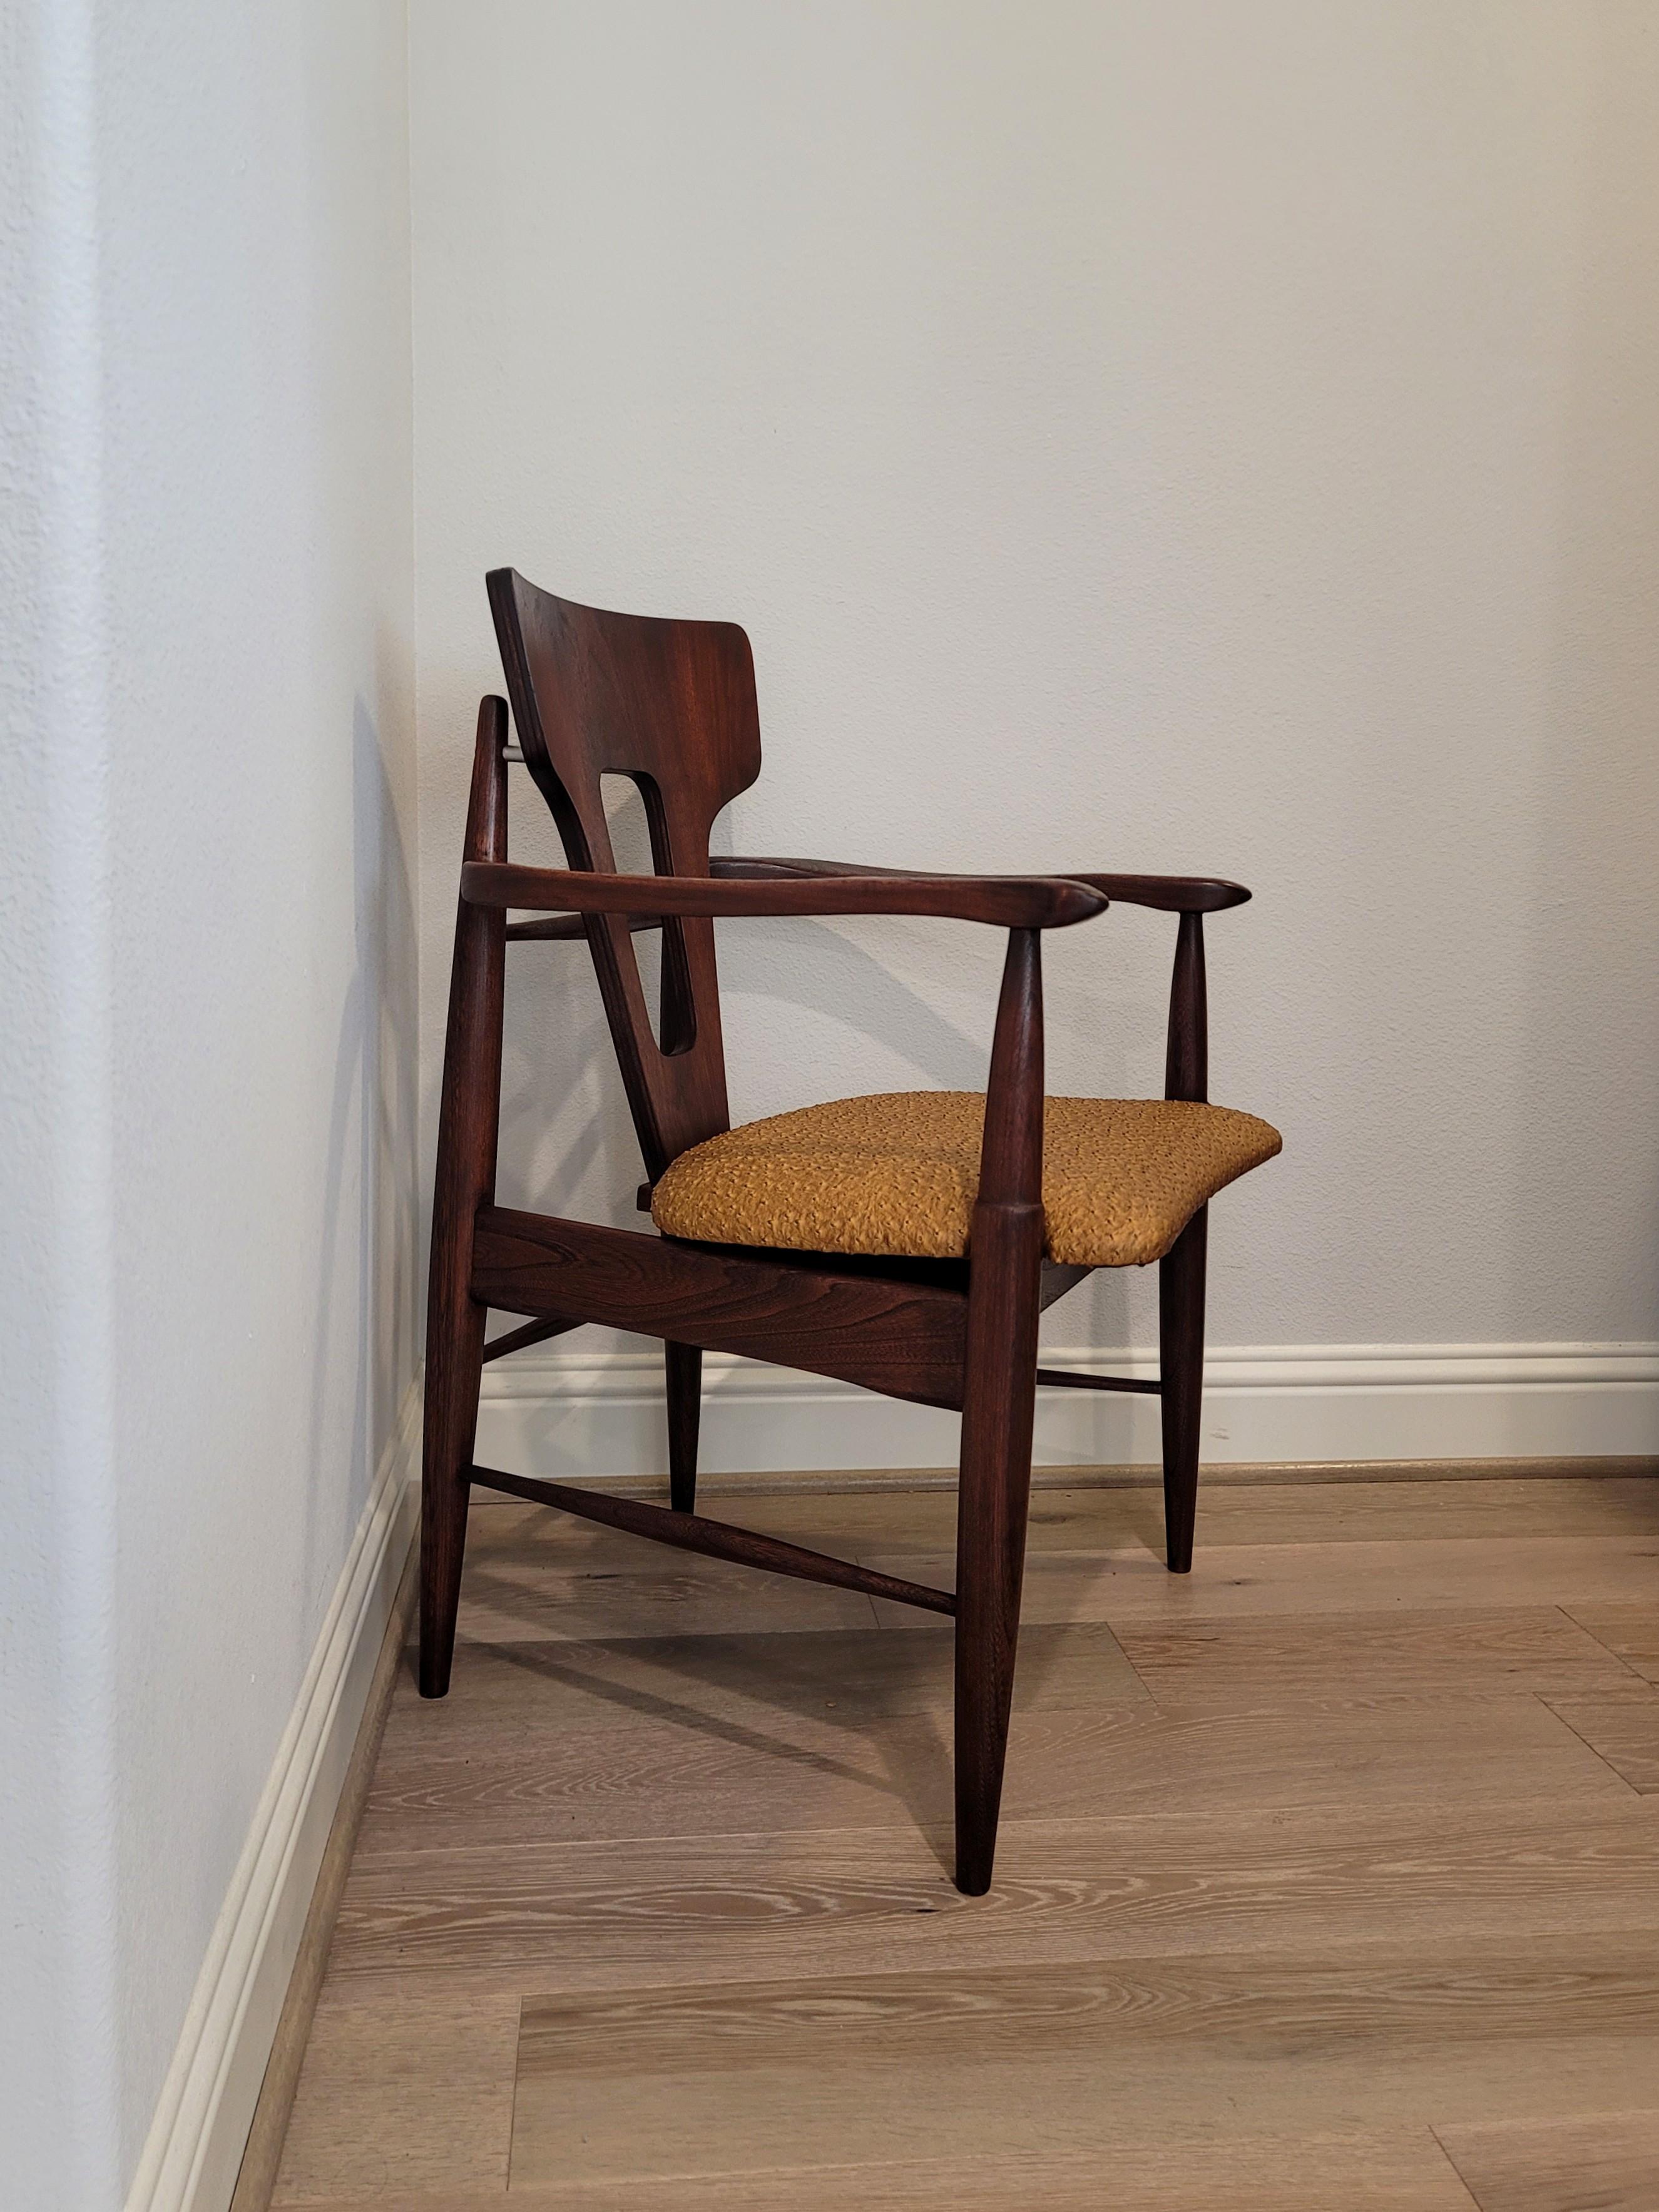 Mid-Century Modern Teak Chair with Ostrich Upholstery  For Sale 5